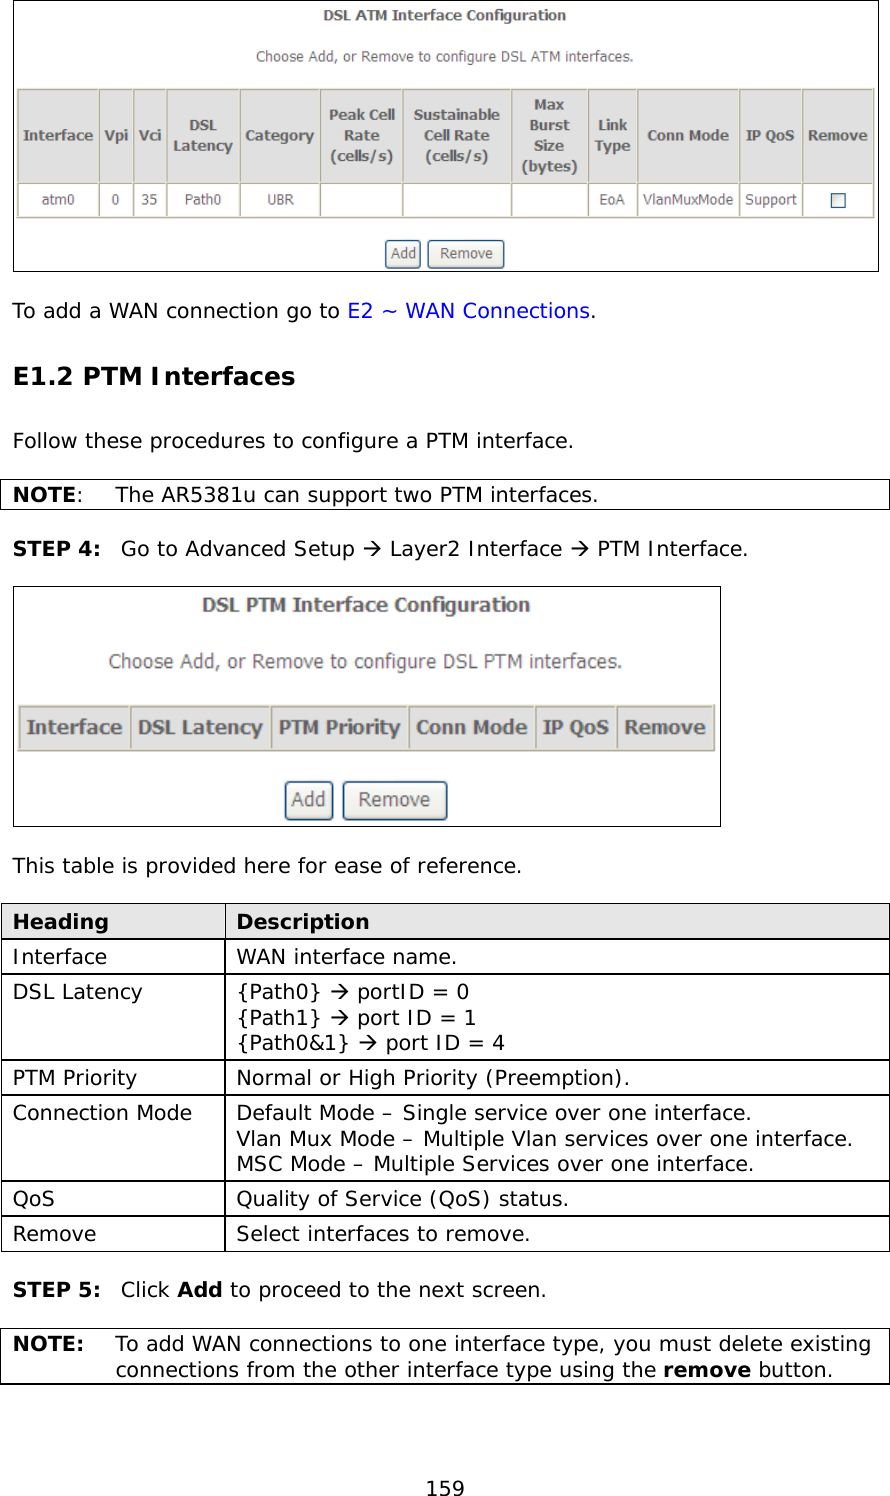  159   To add a WAN connection go to E2 ~ WAN Connections. E1.2 PTM Interfaces Follow these procedures to configure a PTM interface.    NOTE:  The AR5381u can support two PTM interfaces.   STEP 4:  Go to Advanced Setup  Layer2 Interface  PTM Interface.    This table is provided here for ease of reference.  Heading  Description Interface  WAN interface name. DSL Latency  {Path0}  portID = 0  {Path1}  port ID = 1 {Path0&amp;1}  port ID = 4  PTM Priority  Normal or High Priority (Preemption). Connection Mode  Default Mode – Single service over one interface. Vlan Mux Mode – Multiple Vlan services over one interface. MSC Mode – Multiple Services over one interface.  QoS  Quality of Service (QoS) status. Remove  Select interfaces to remove.  STEP 5:  Click Add to proceed to the next screen.   NOTE:  To add WAN connections to one interface type, you must delete existing connections from the other interface type using the remove button.    